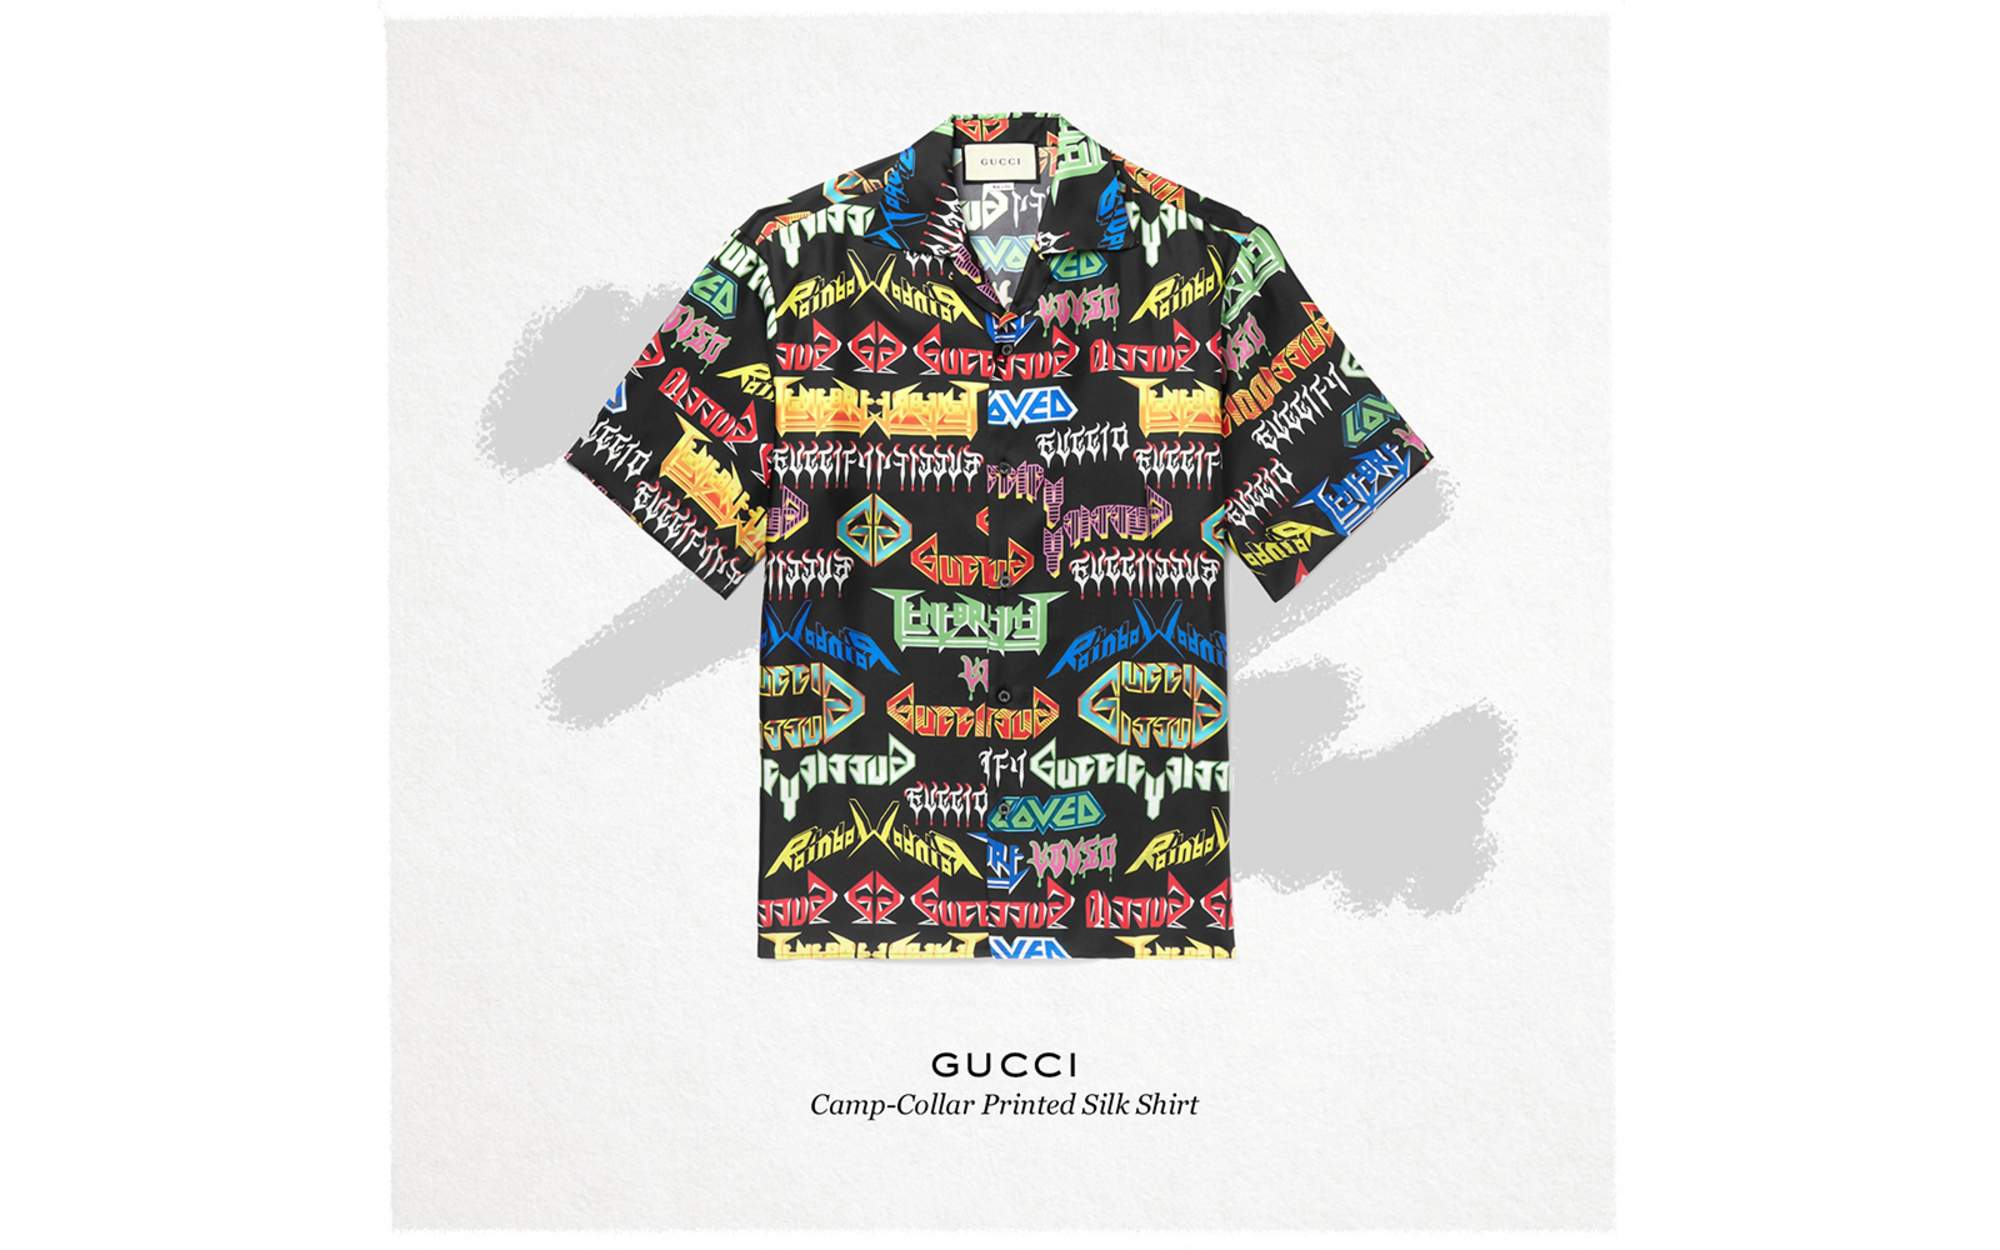 GO BIG OR GO HOME: PRINTED SHIRTS FOR SUMMER